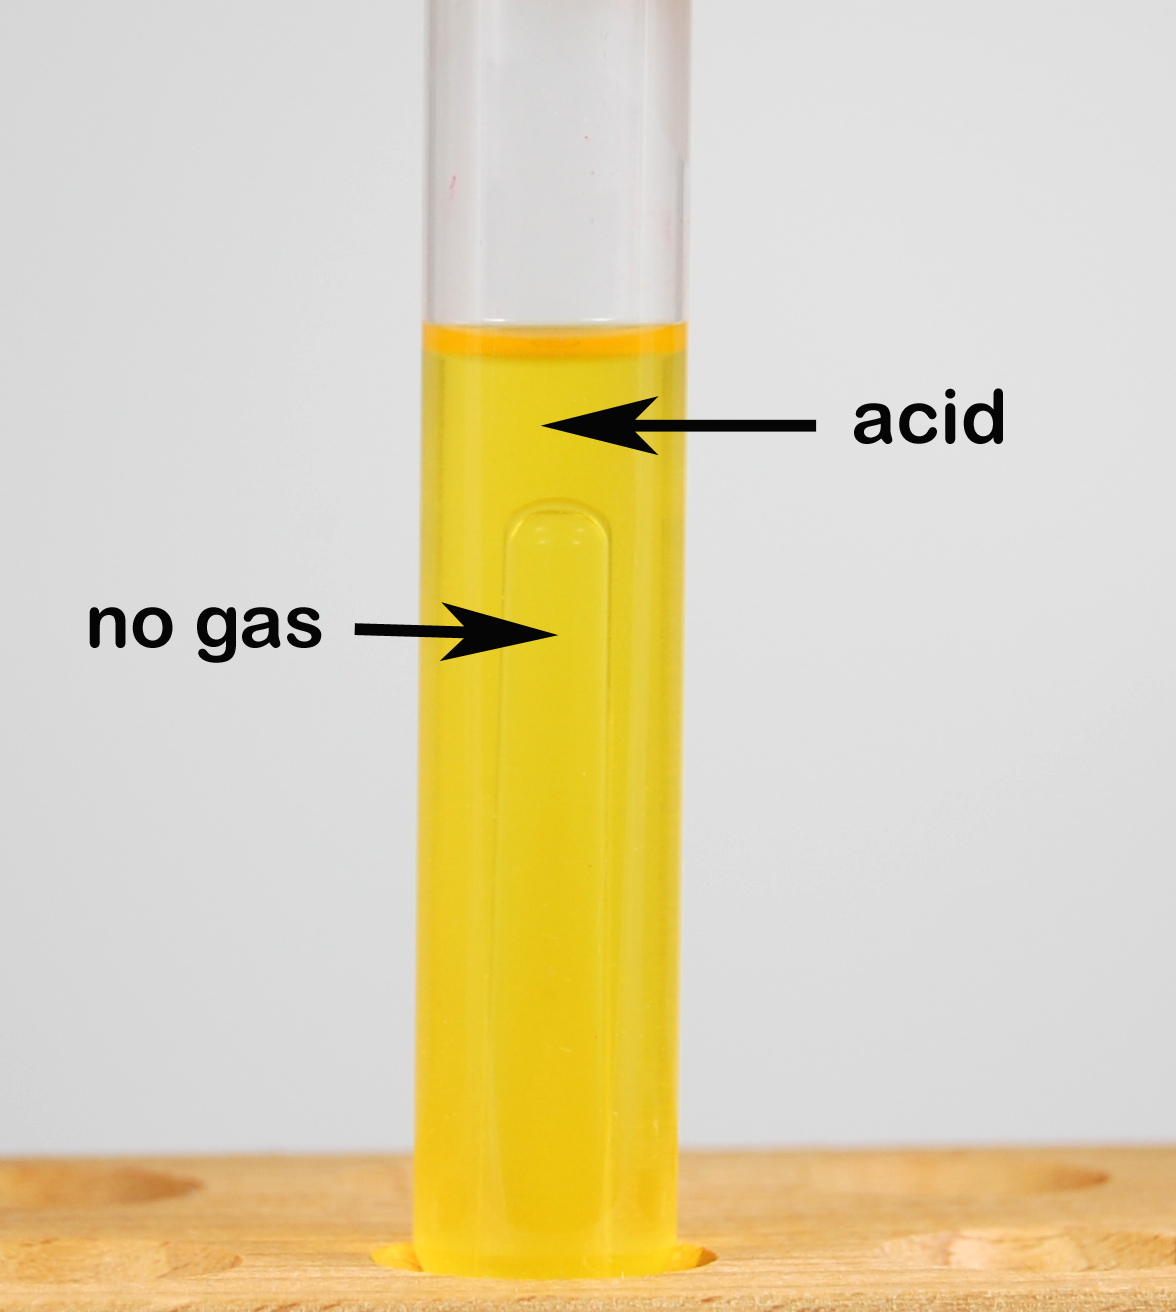 Photograph of a fermentation tube showing bacterial fermentation of a carbohydrate producing acid end products but no gas. Acid end products from carbohydrate 
  fermentation lower the pH causing the pH indicator phenol red to turn from red 
  (neutral) to yellow (acid), but there is no gas seen at the top of the Durham tube.